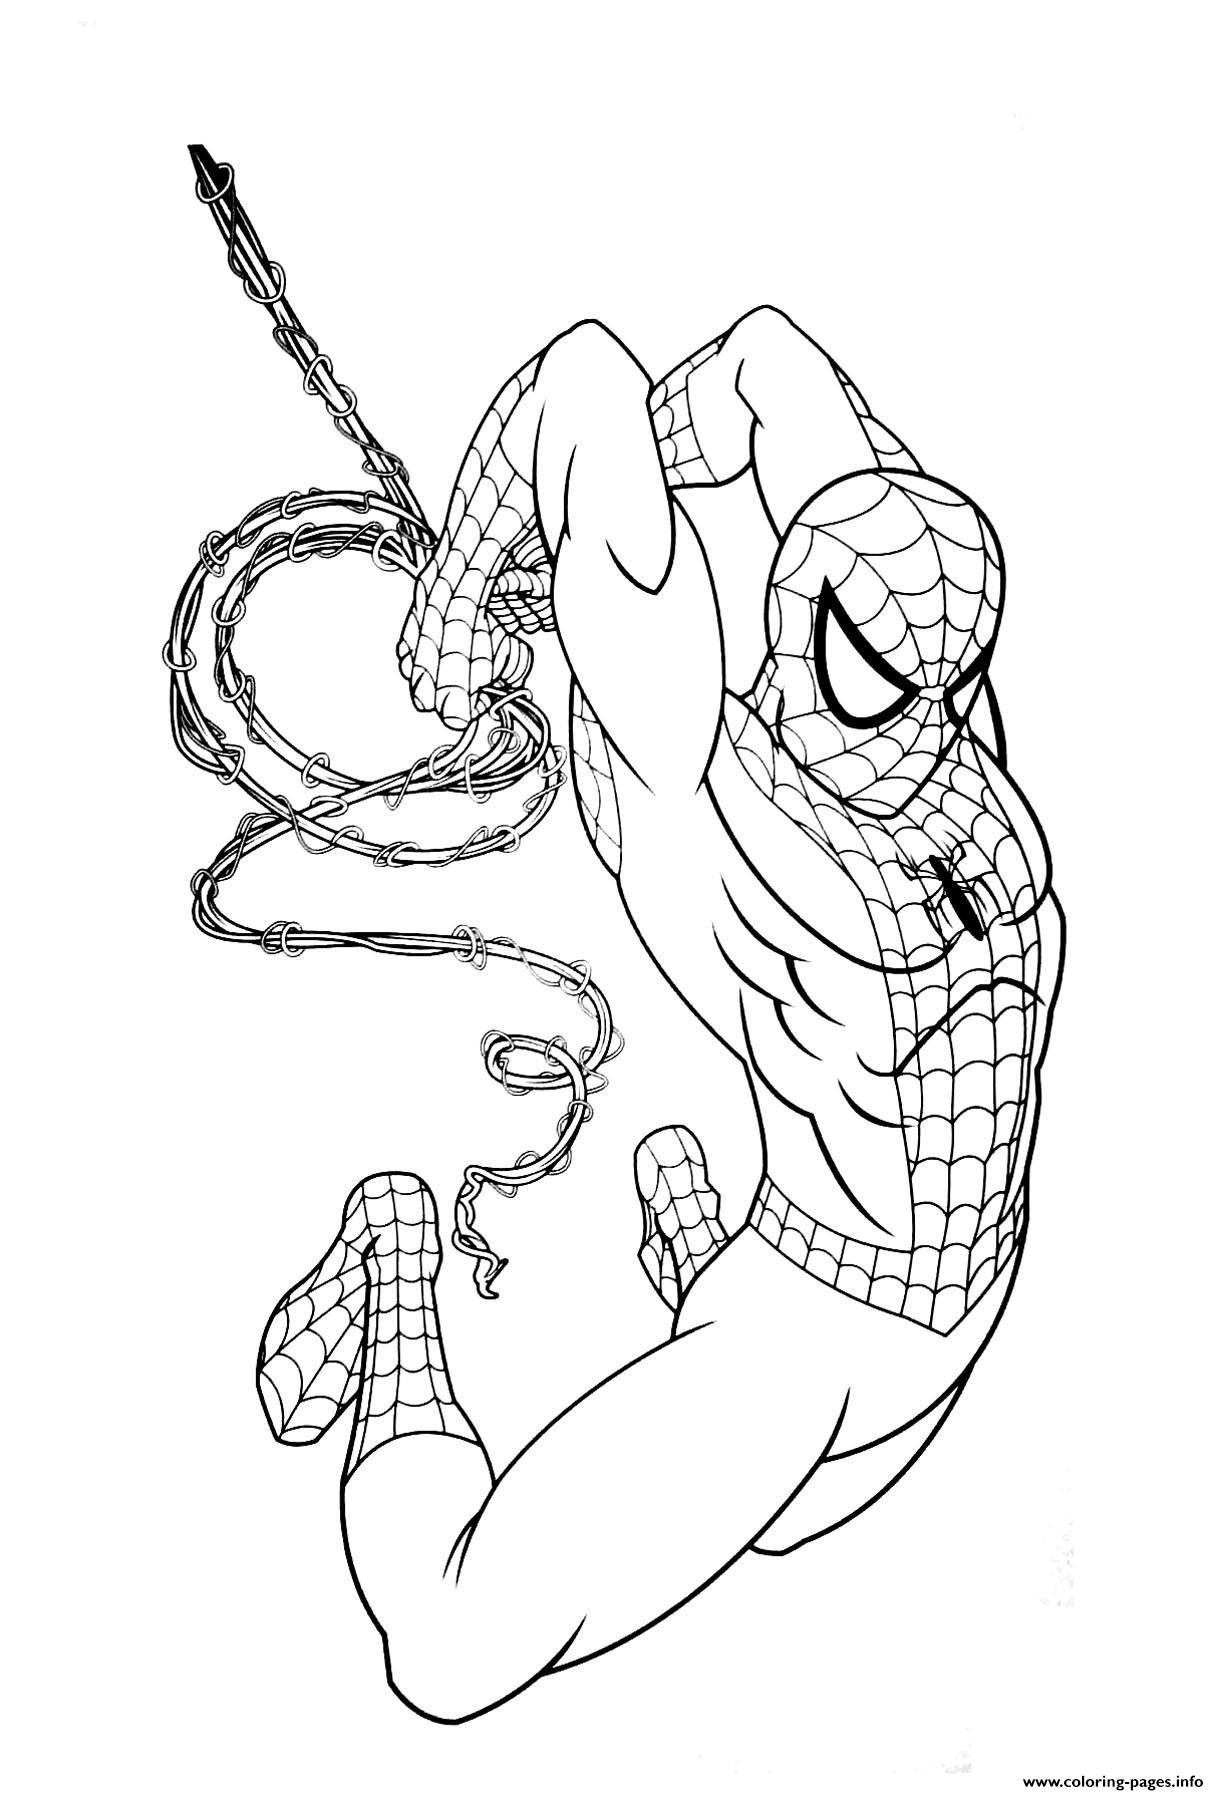 Avengers Endgame Spiderman Coloring page Printable